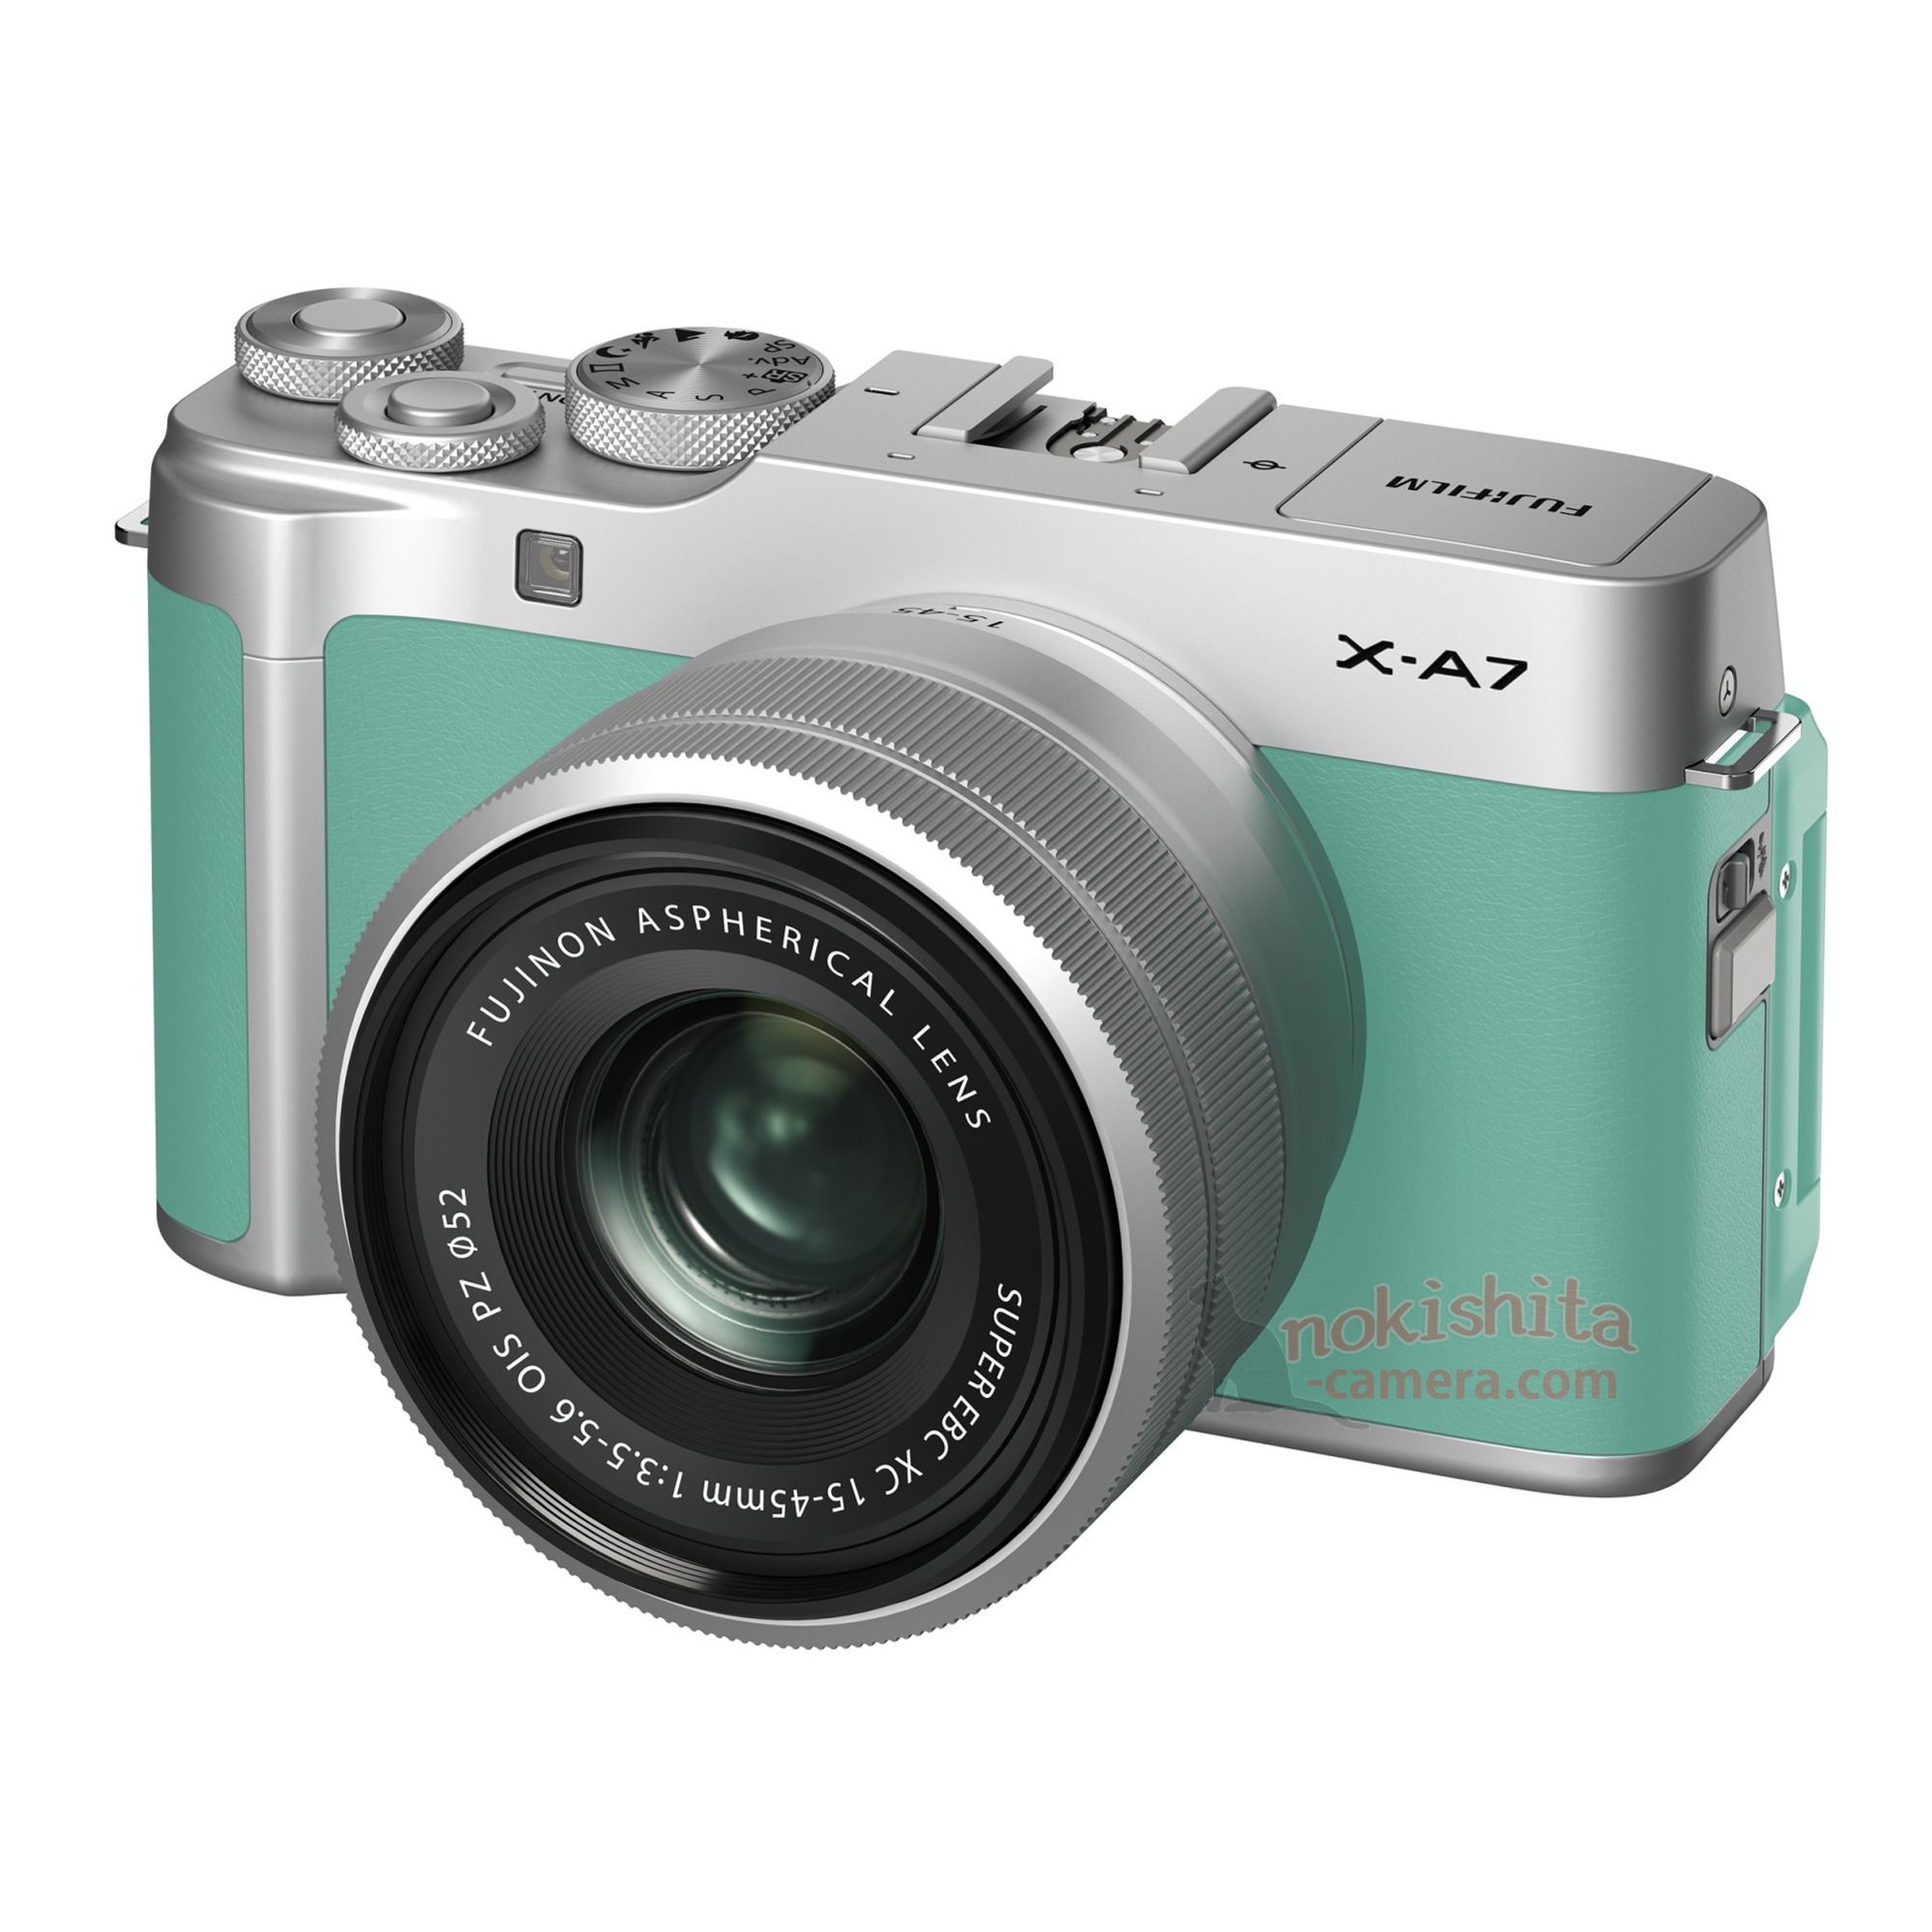 Fujifilm X-A7 Specs and Price Leaked - Coming September 12th